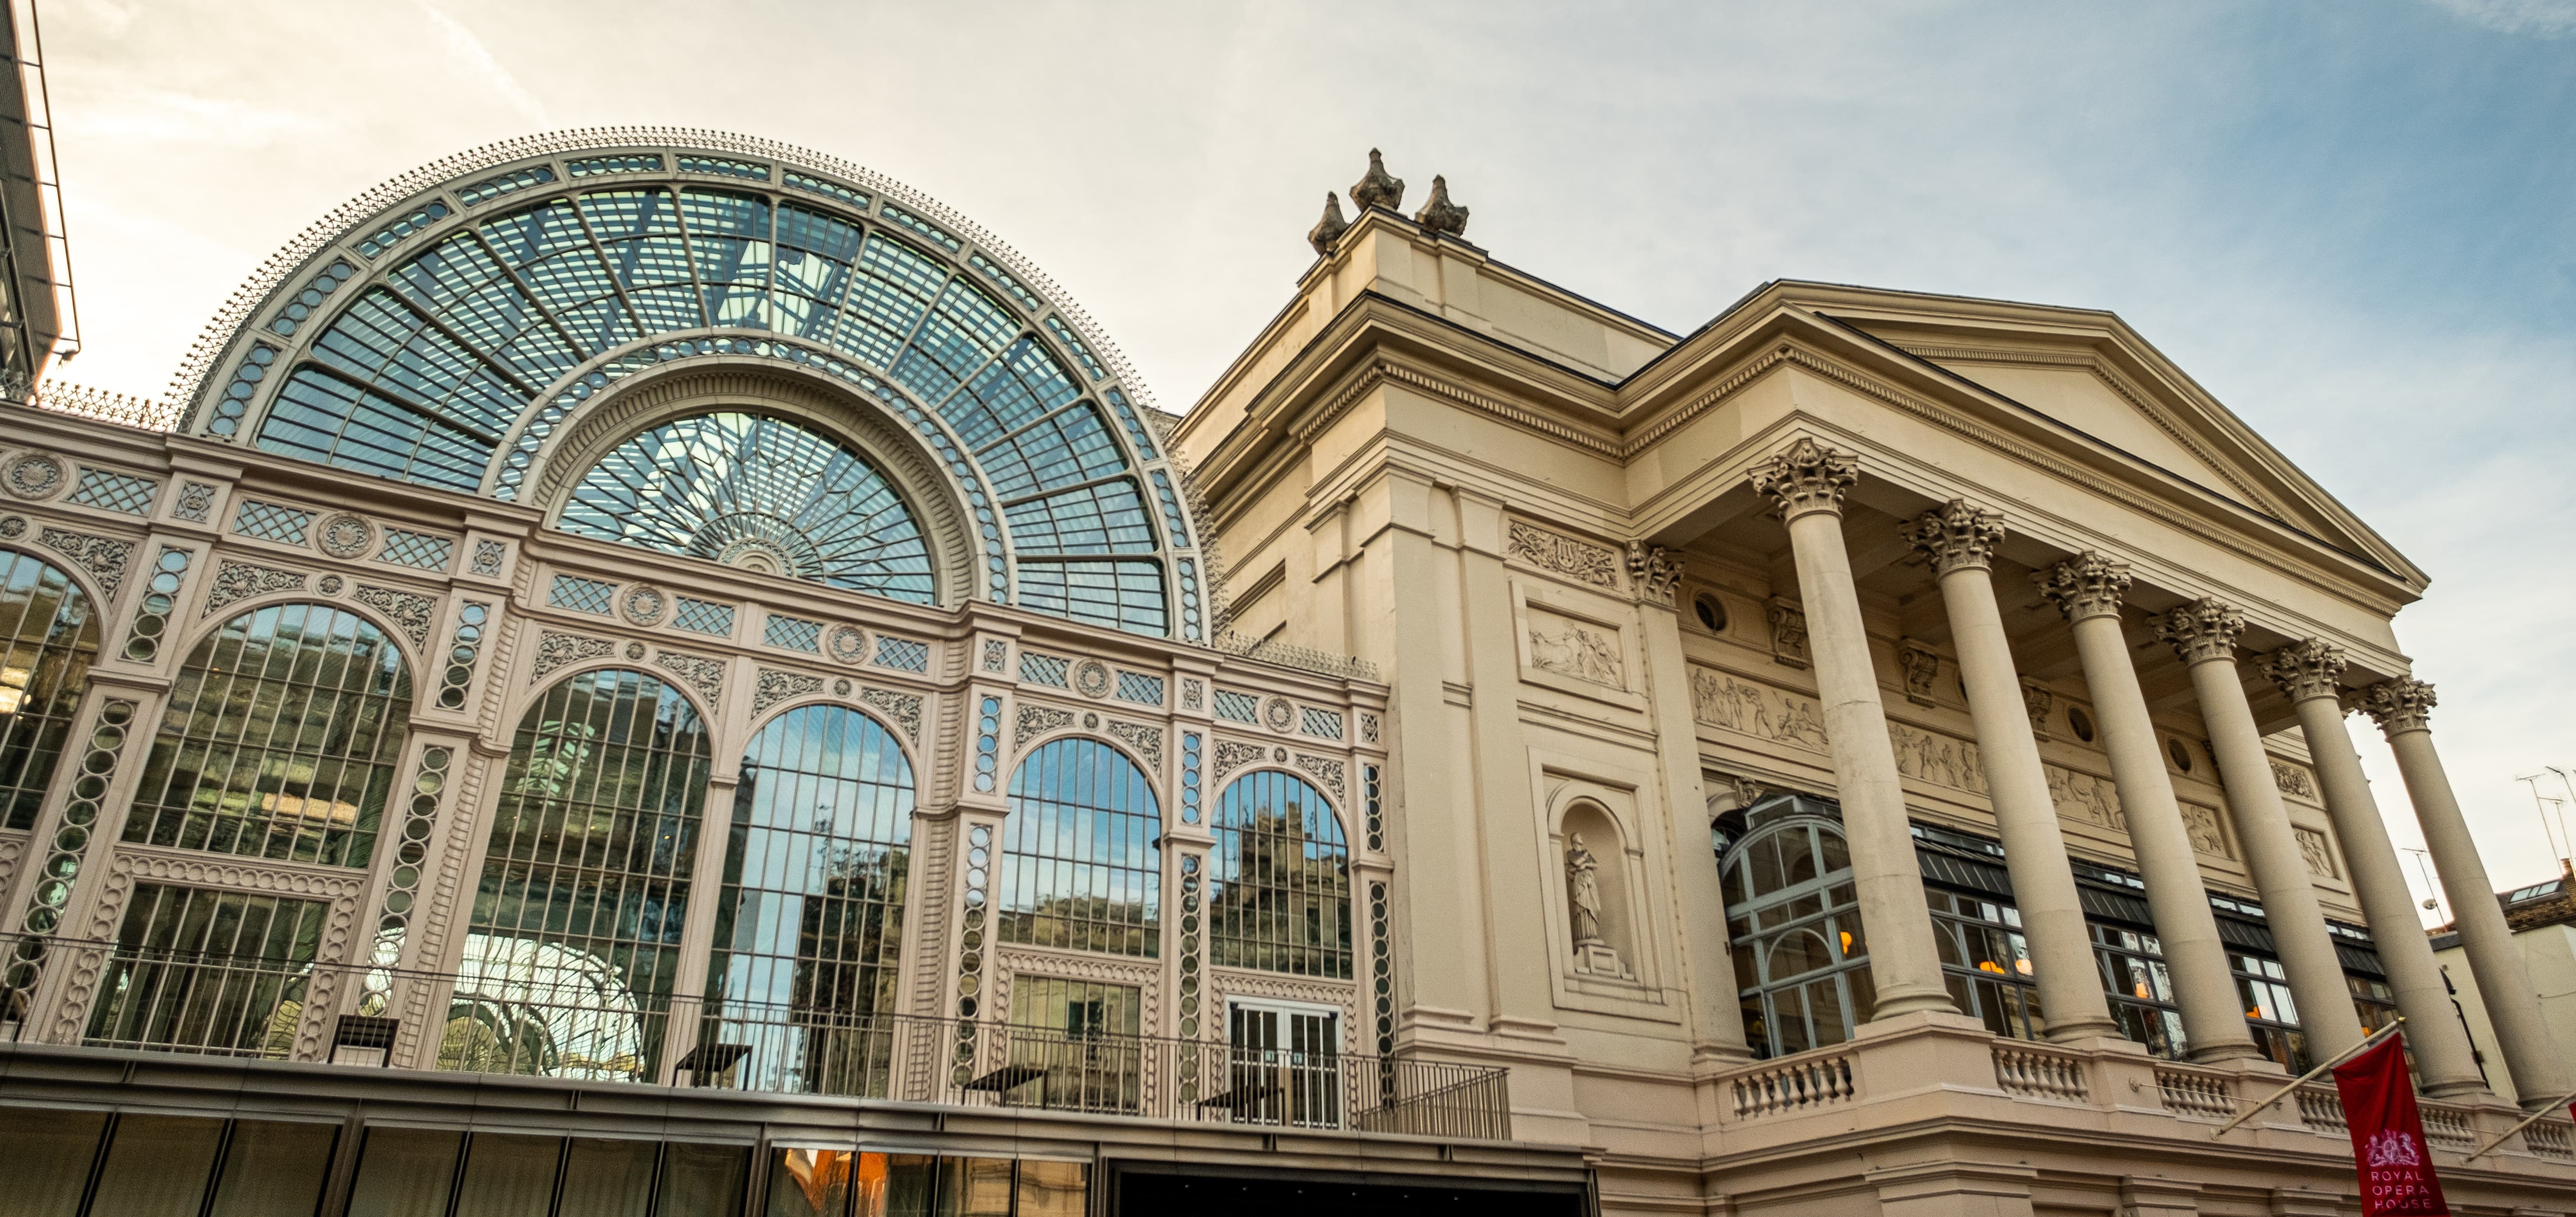 An image of the front of the Royal Opera House in London